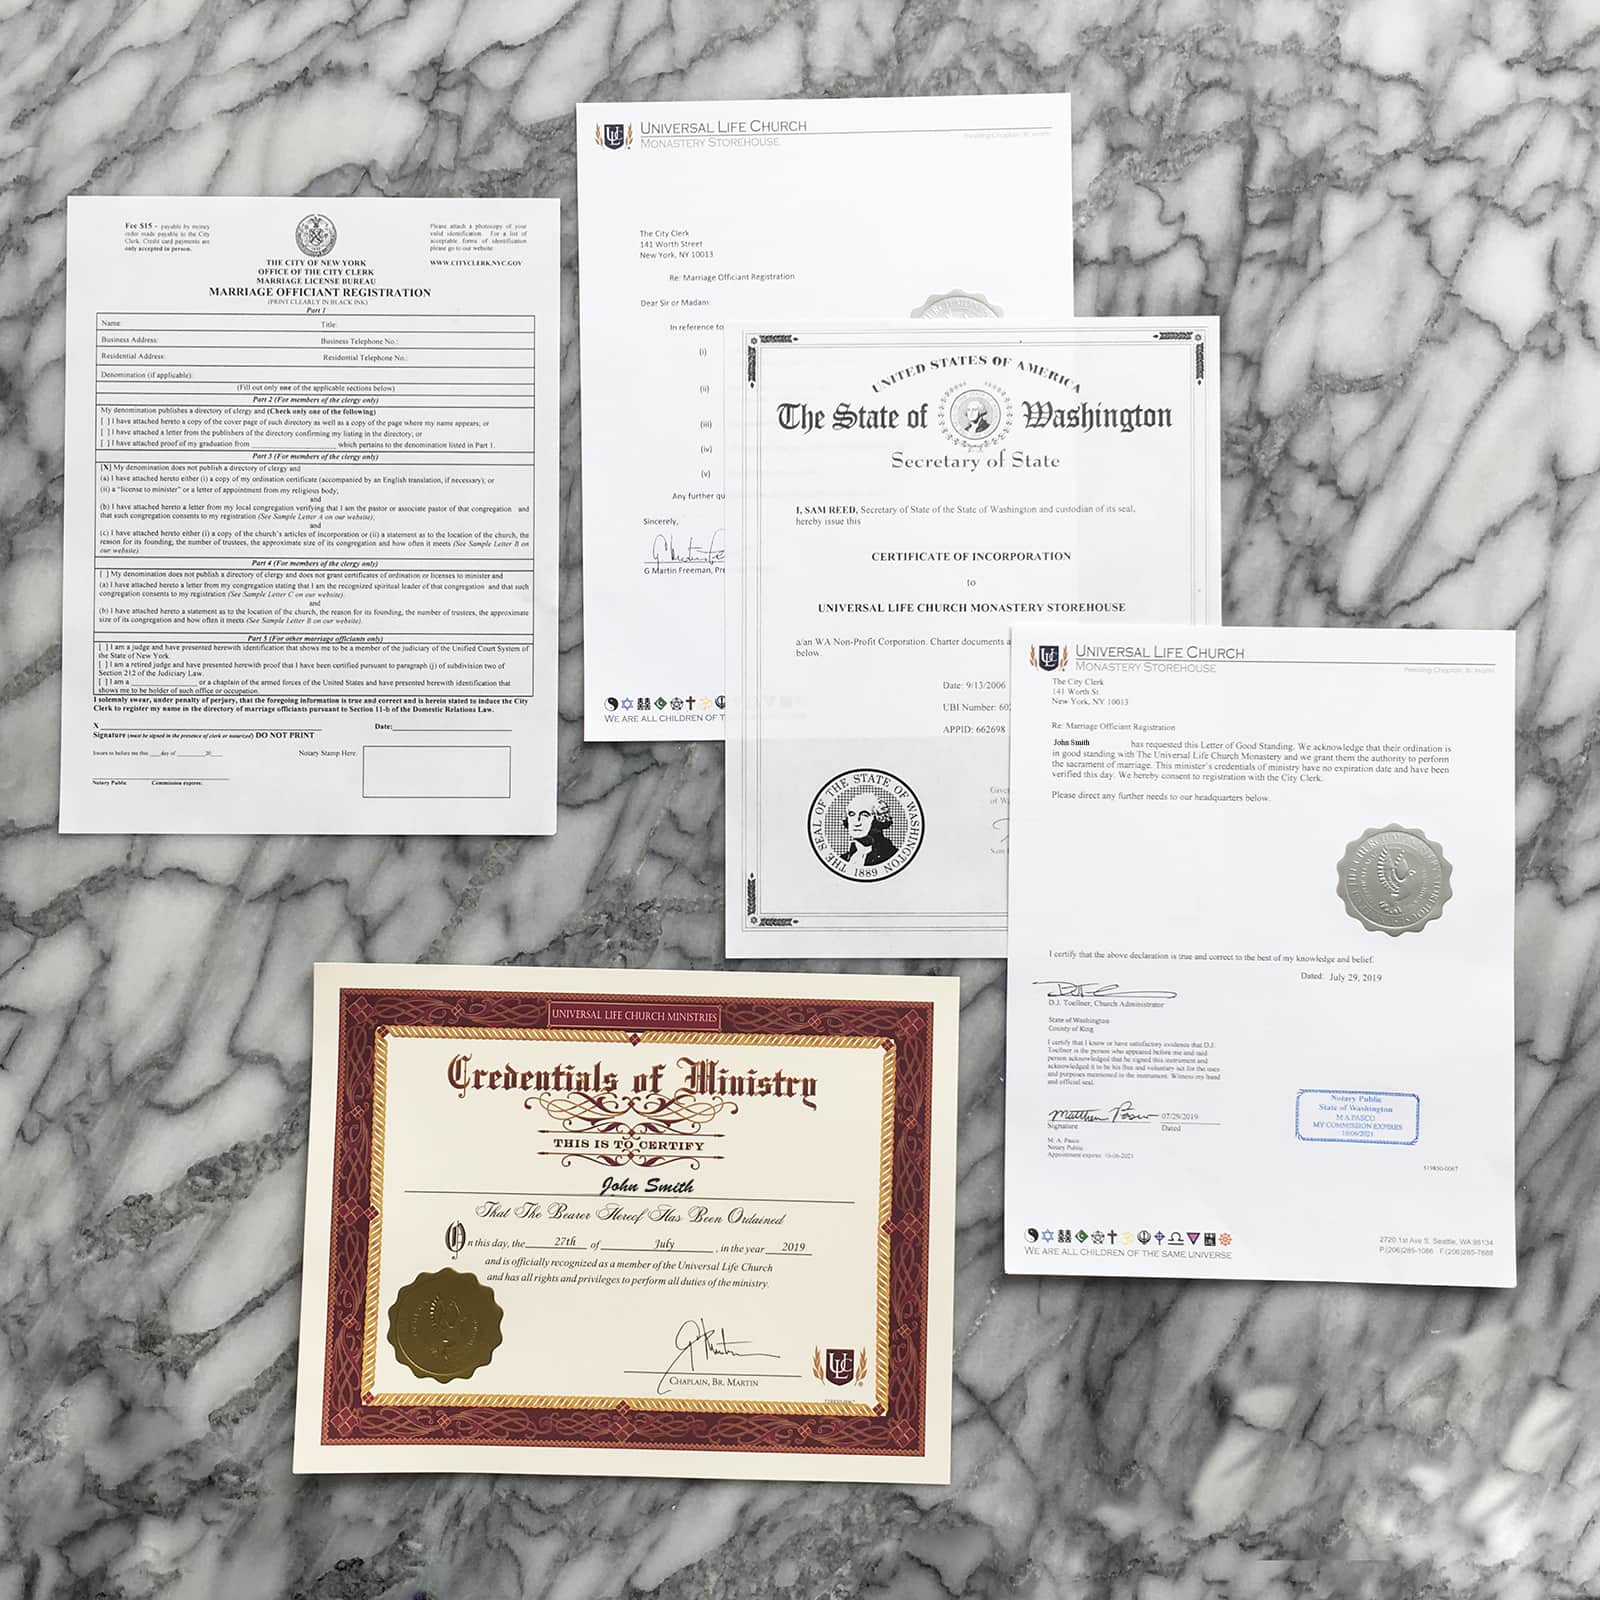 How to become a wedding officiant in NYC